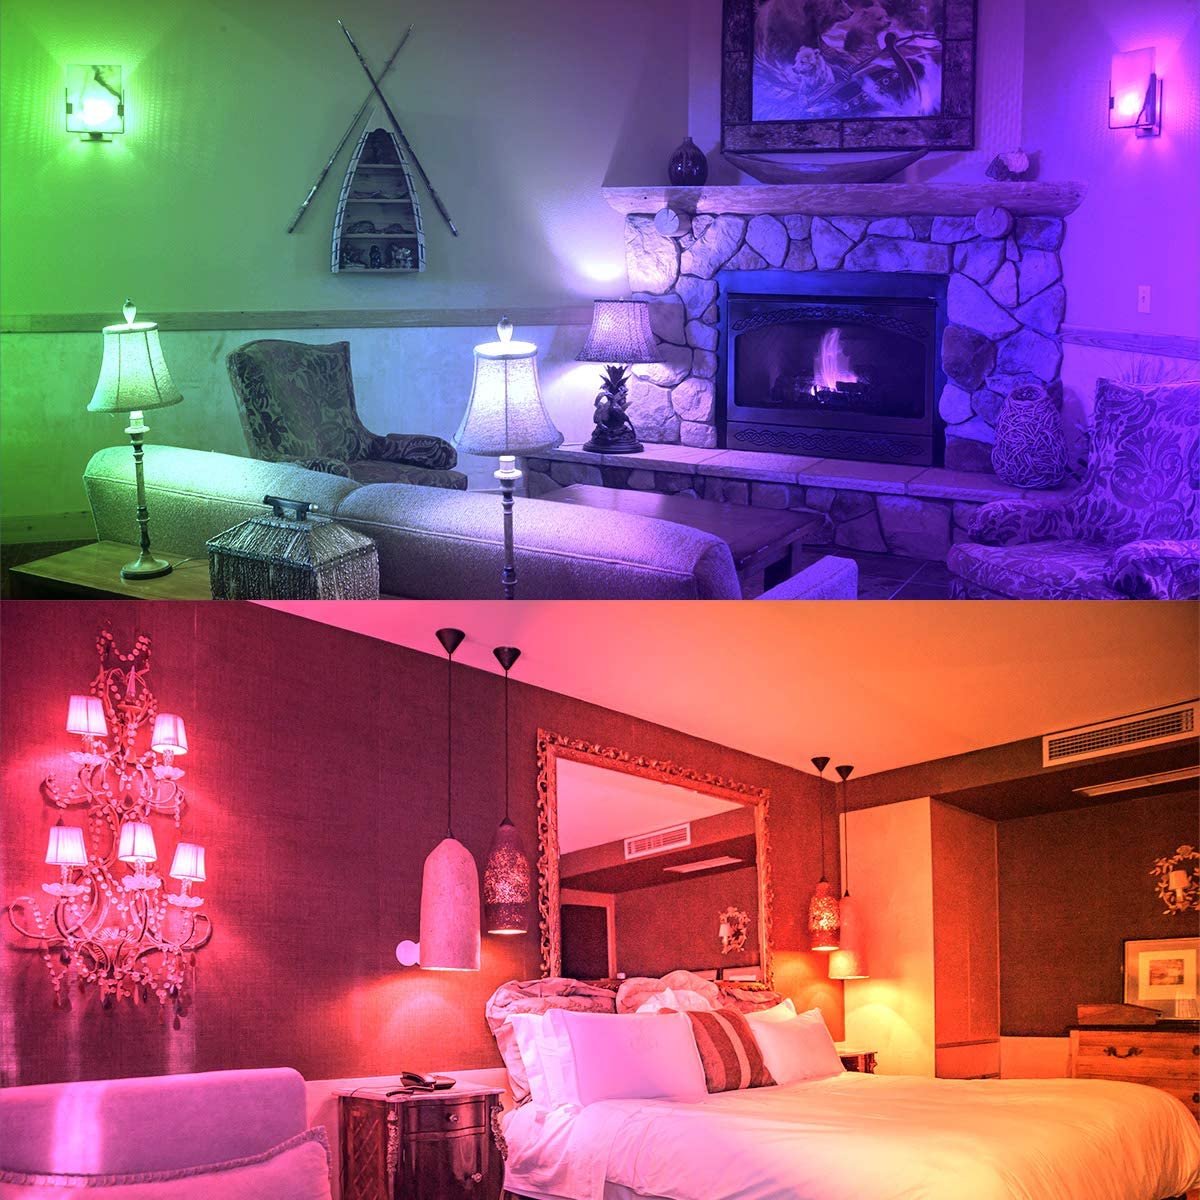 RGB Light bulbs with Remote to change the Color - iLC LED Light